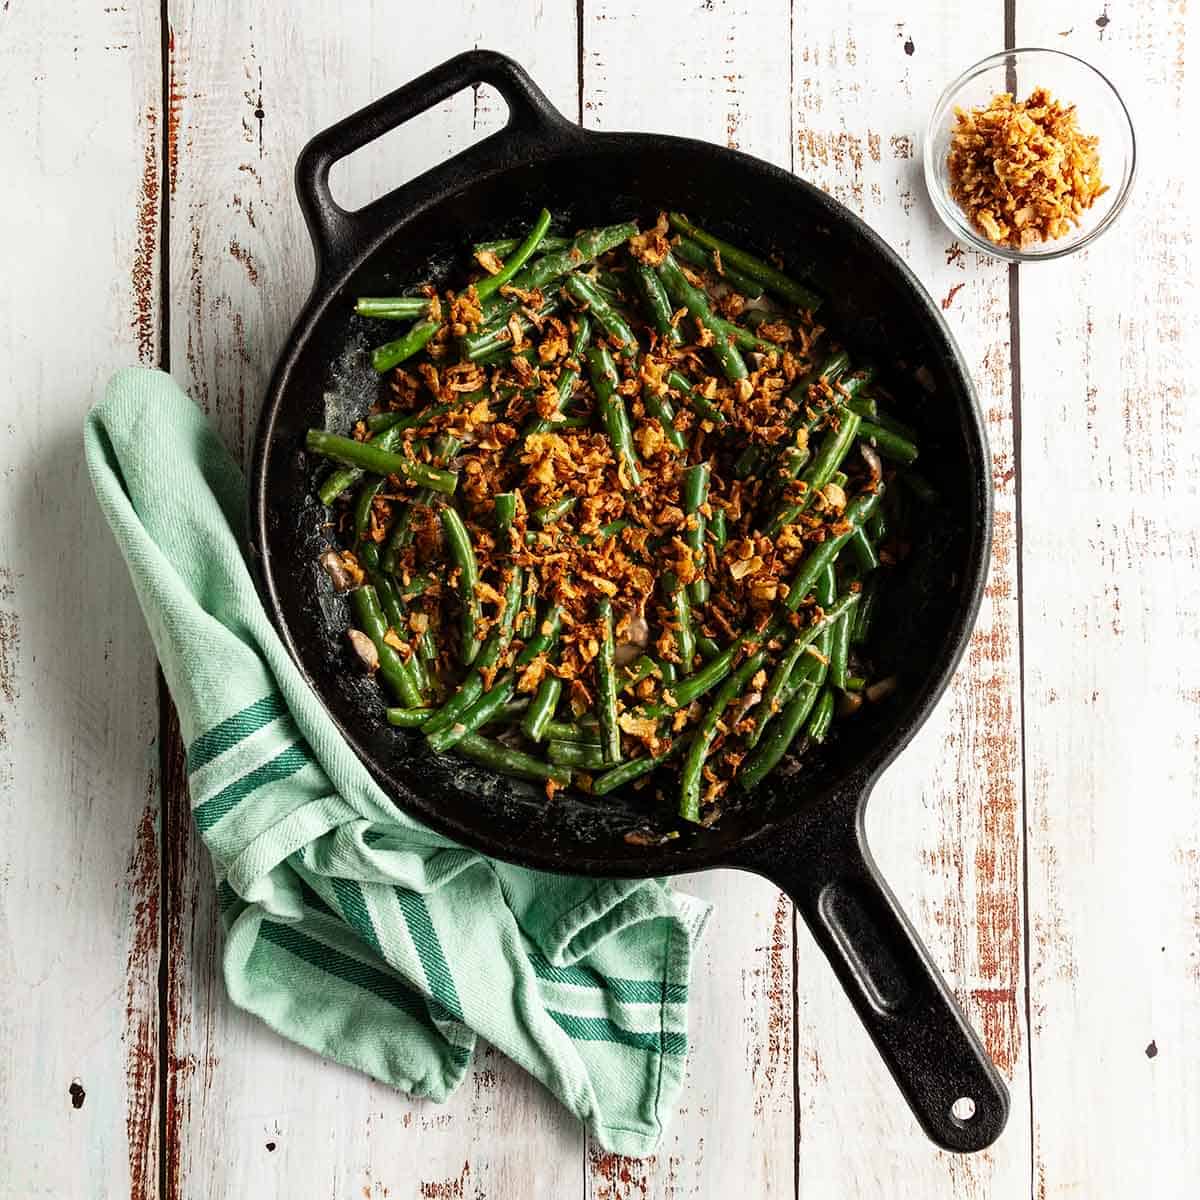 Green bean casserole cooked in a cast iron skillet served as a side.